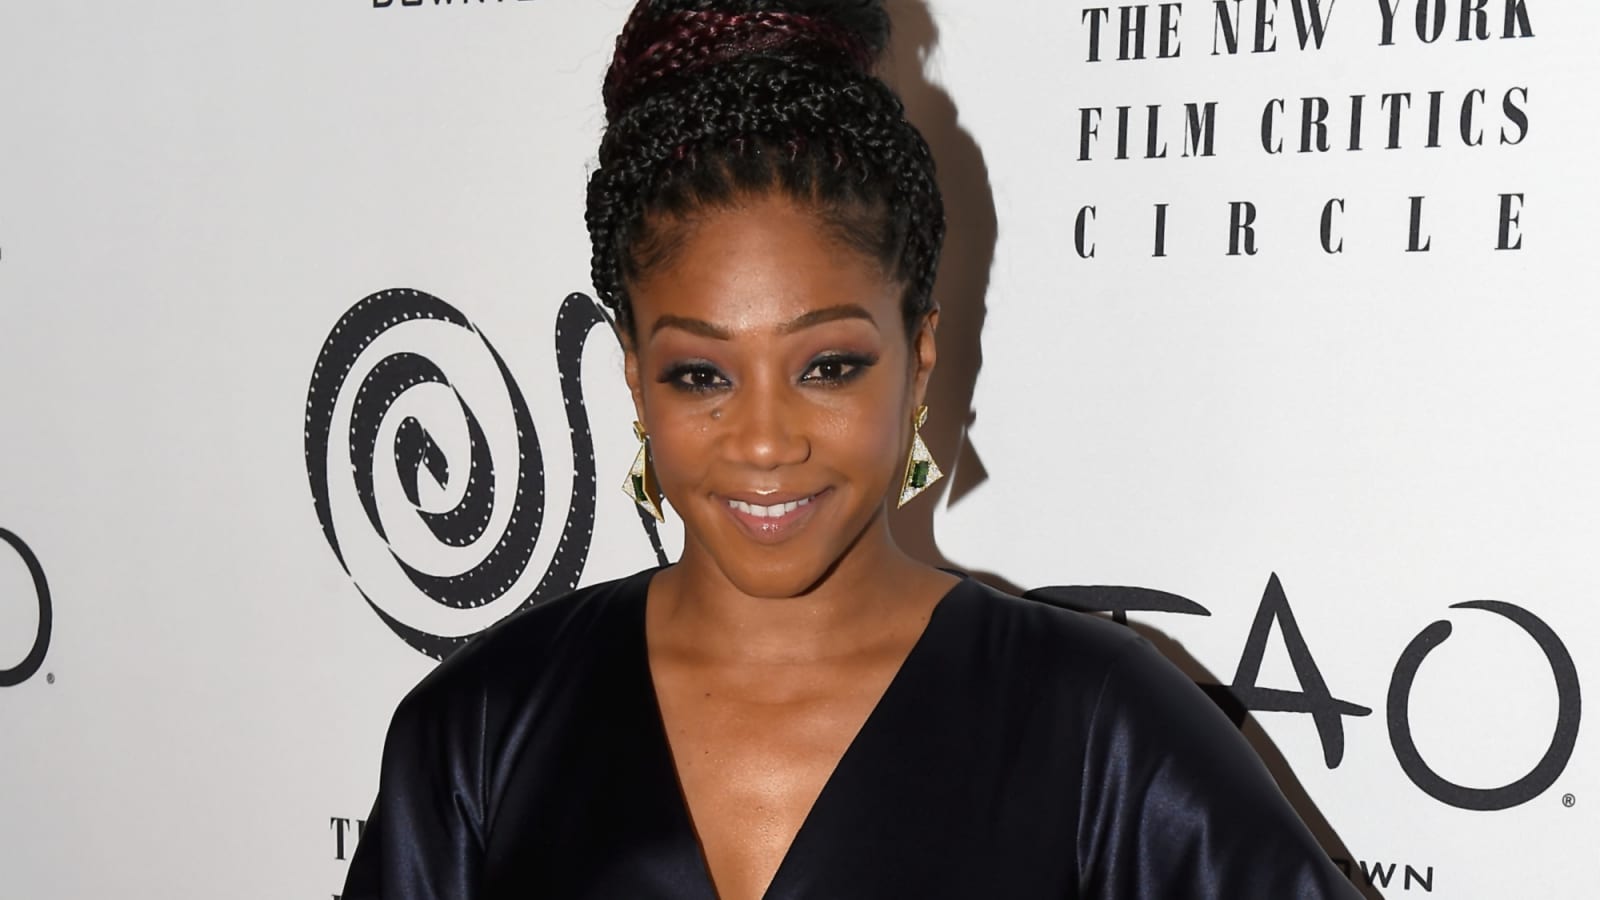 Programing water is how Tiffany Haddish gets her way, she claims